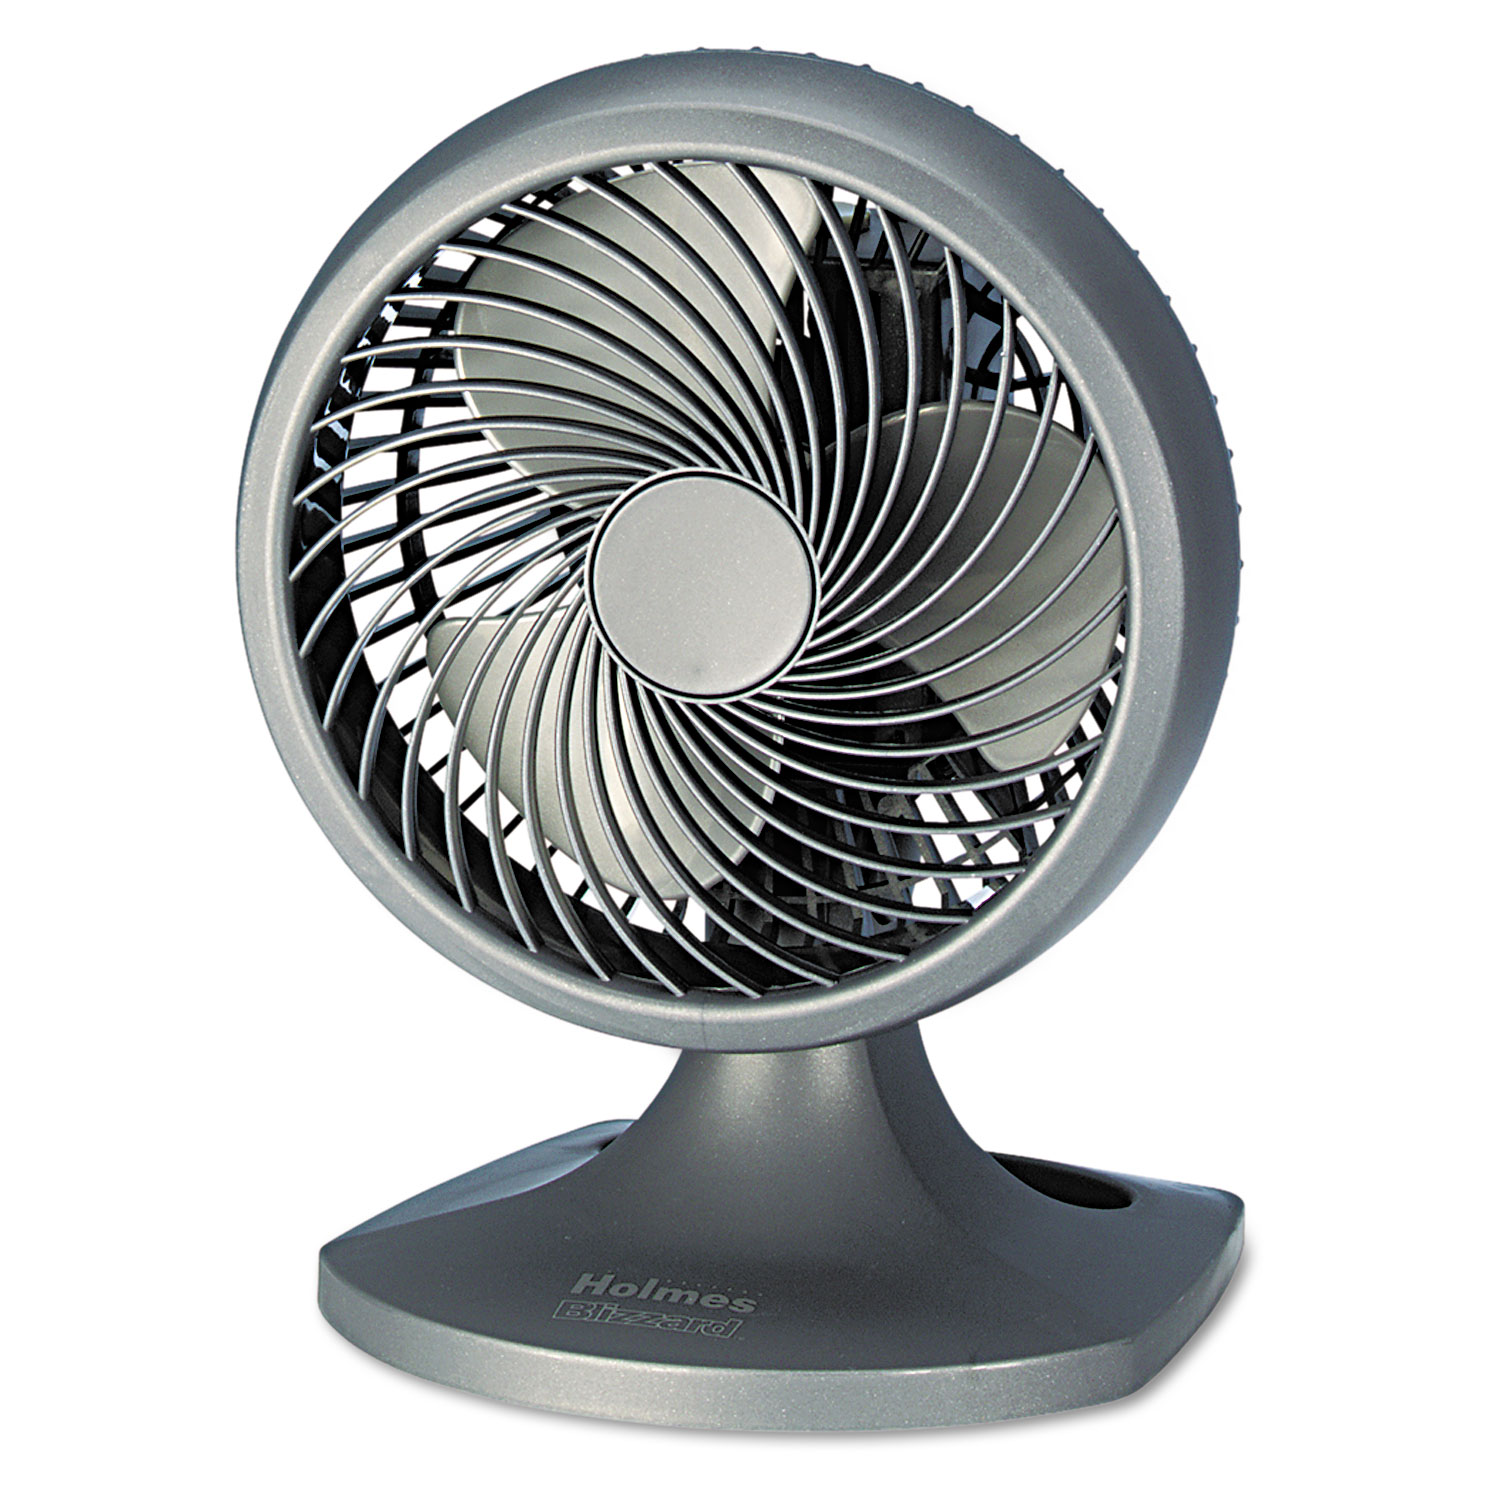  Holmes HAOF90UC042 Blizzard 9 Three-Speed Oscillating Table/Wall Fan, Charcoal (HLSHAOF90NUC) 